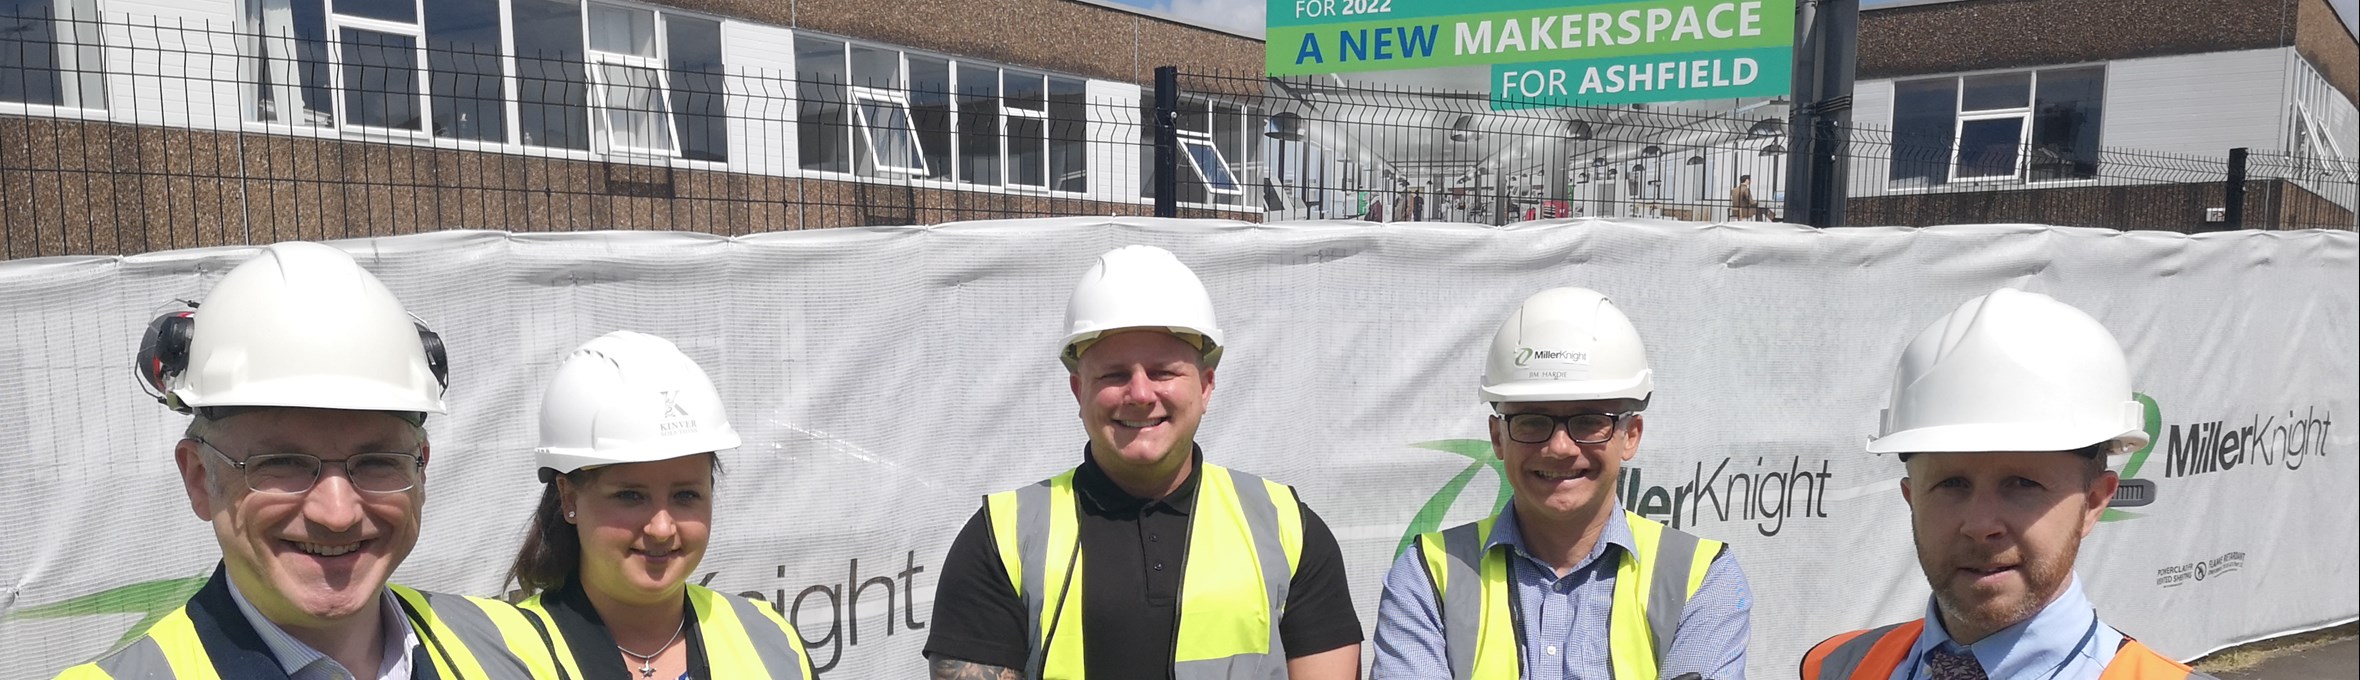 Cllr Matt Relf, Project Officer Paul Crawford and members of Miller Knight building company